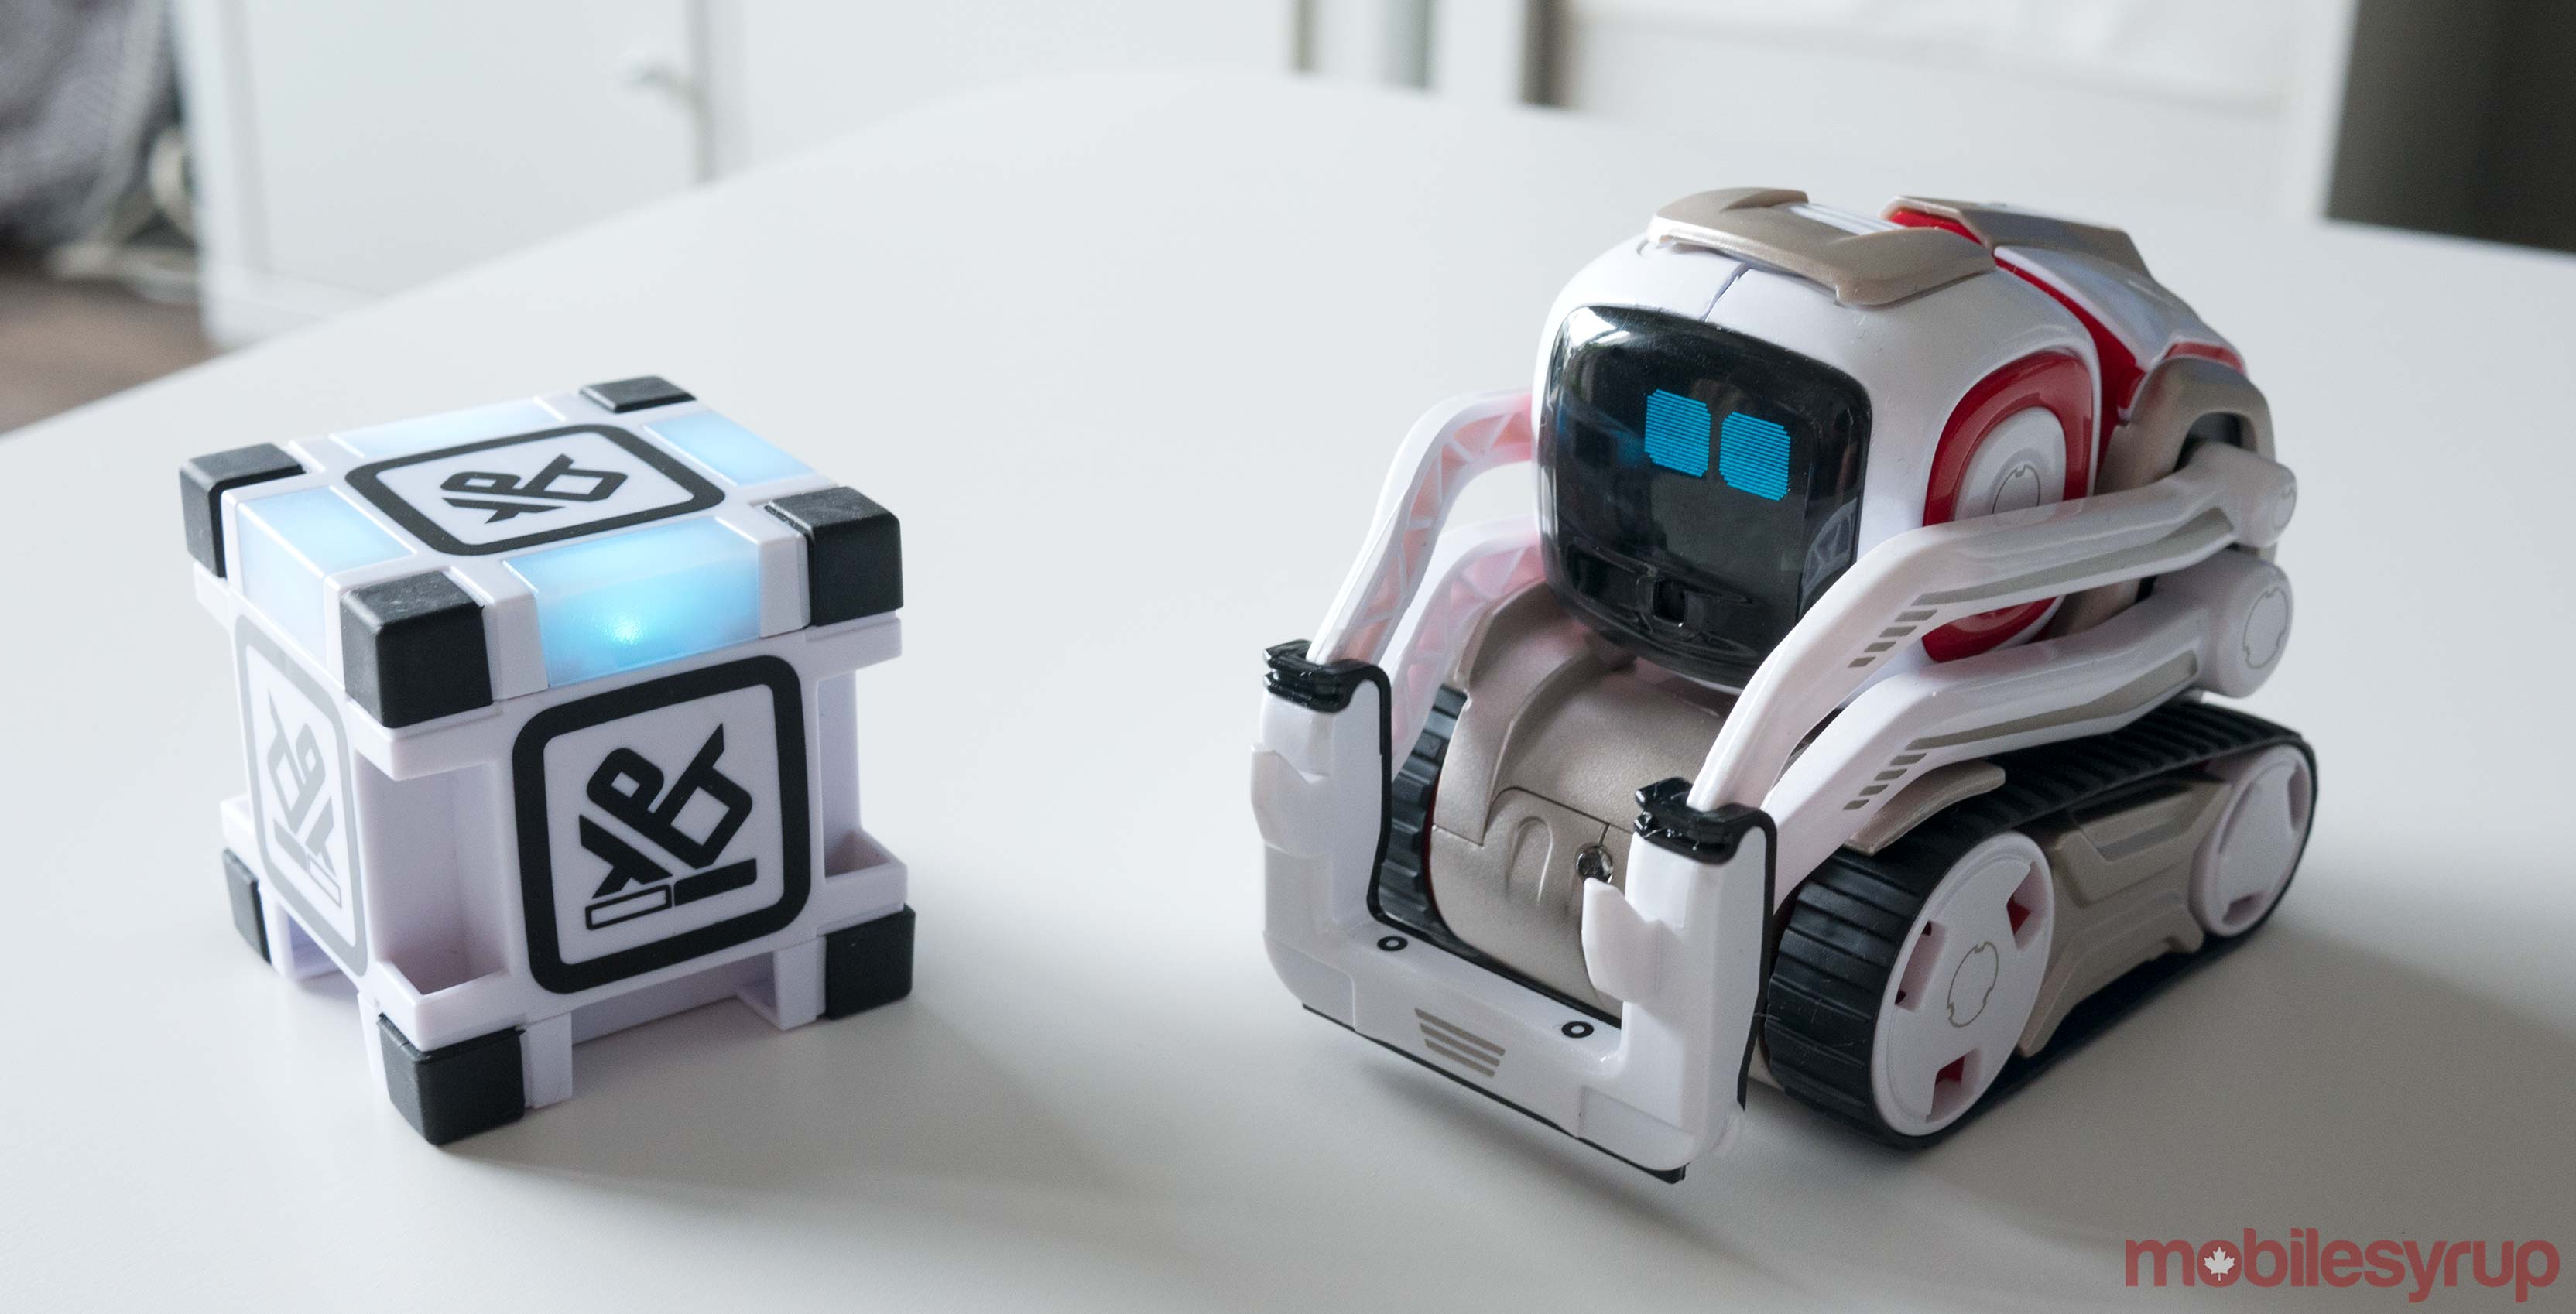 anki cozmo robot with power cubes